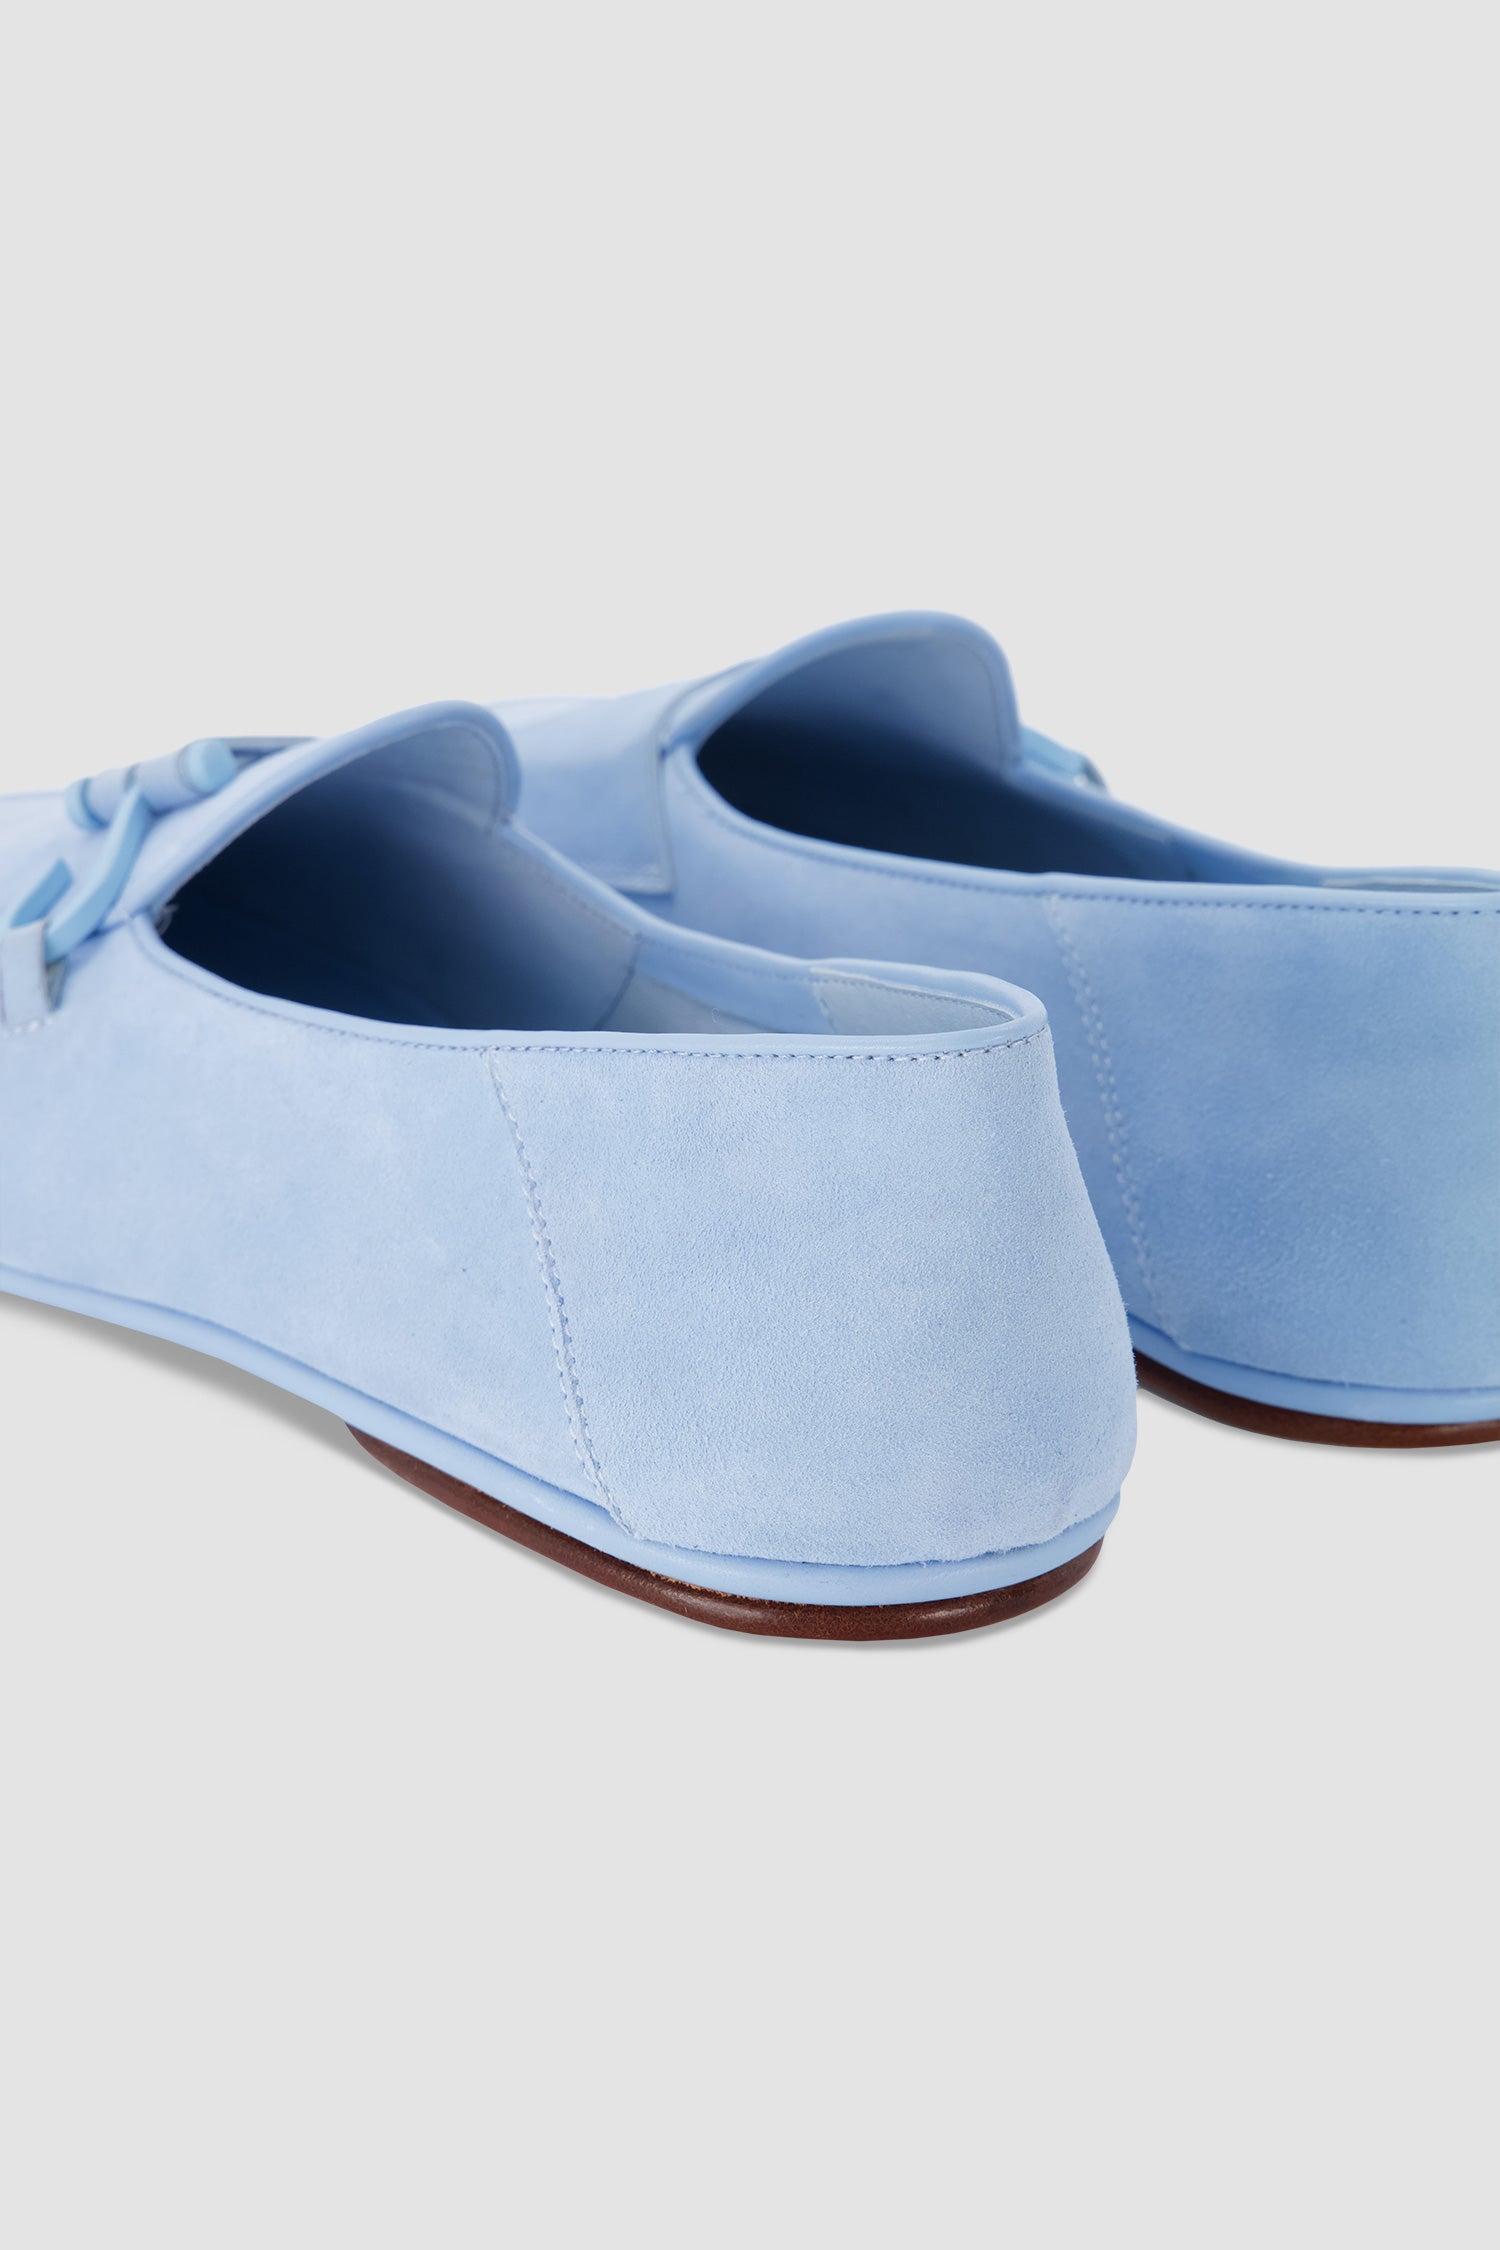 Edhen Milano Comporta Fly Light Blue Suede Loafers